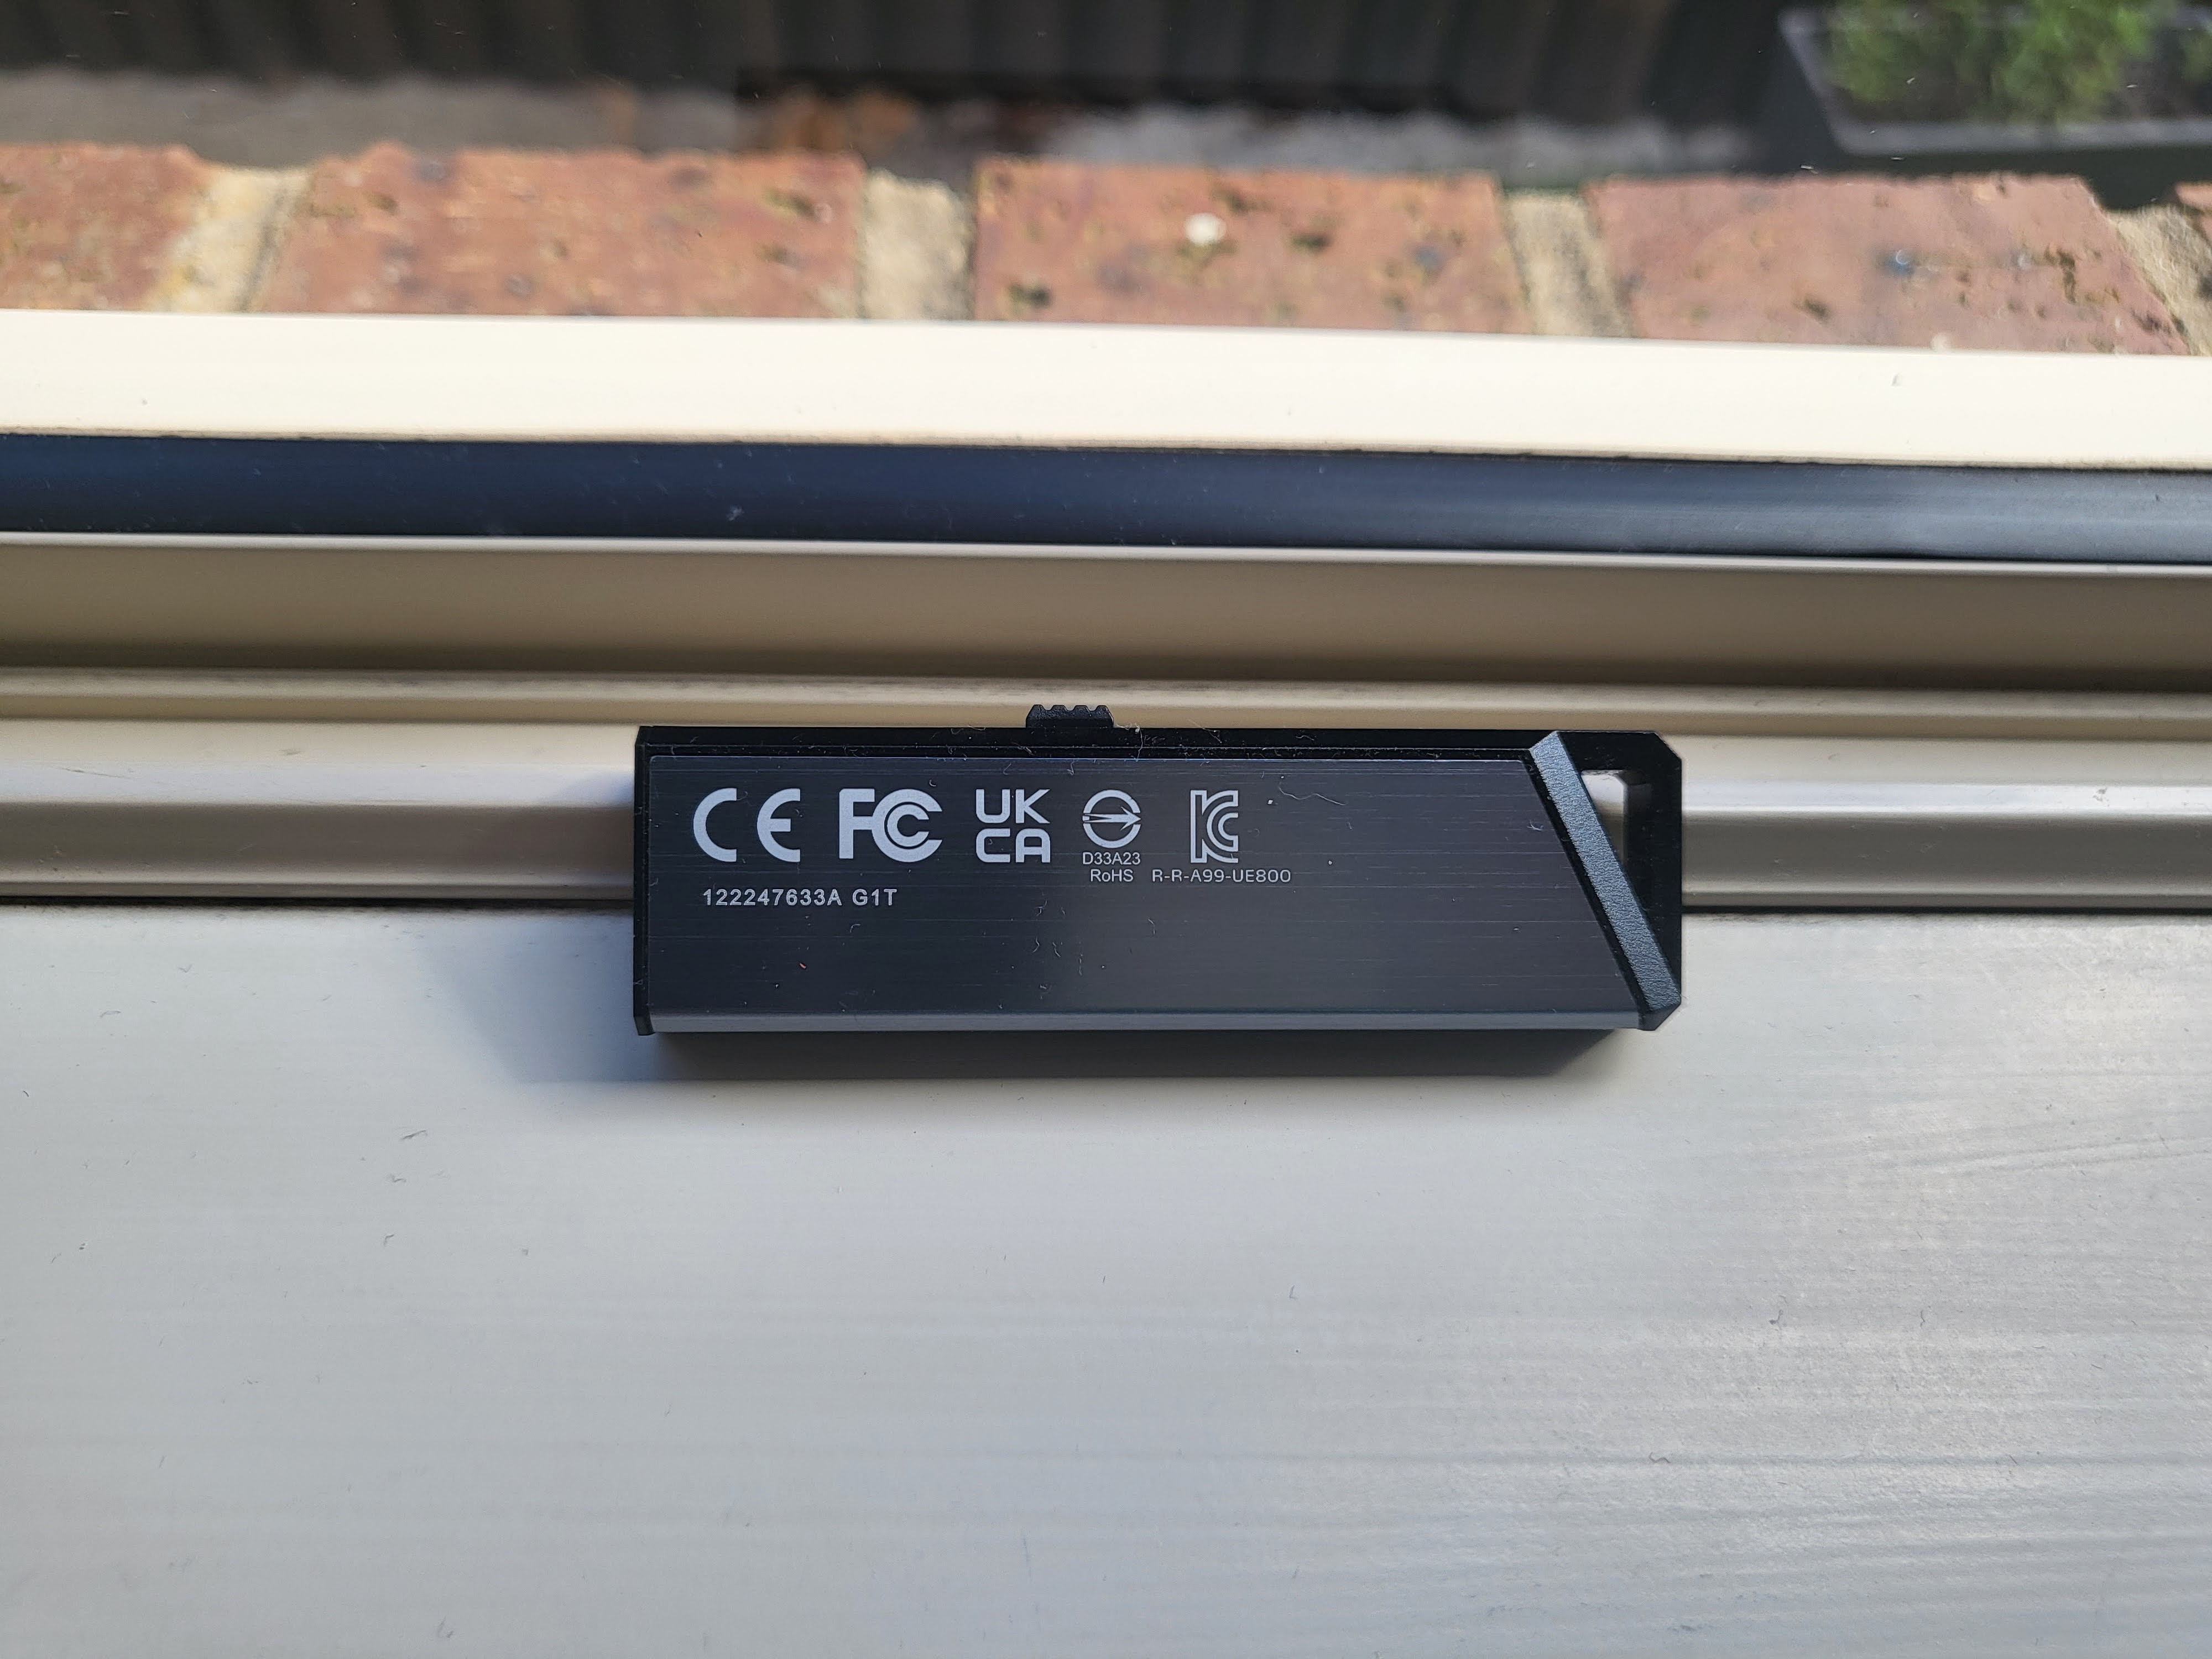 Adata UE800 1TB SSD on a window sill during our test and review process